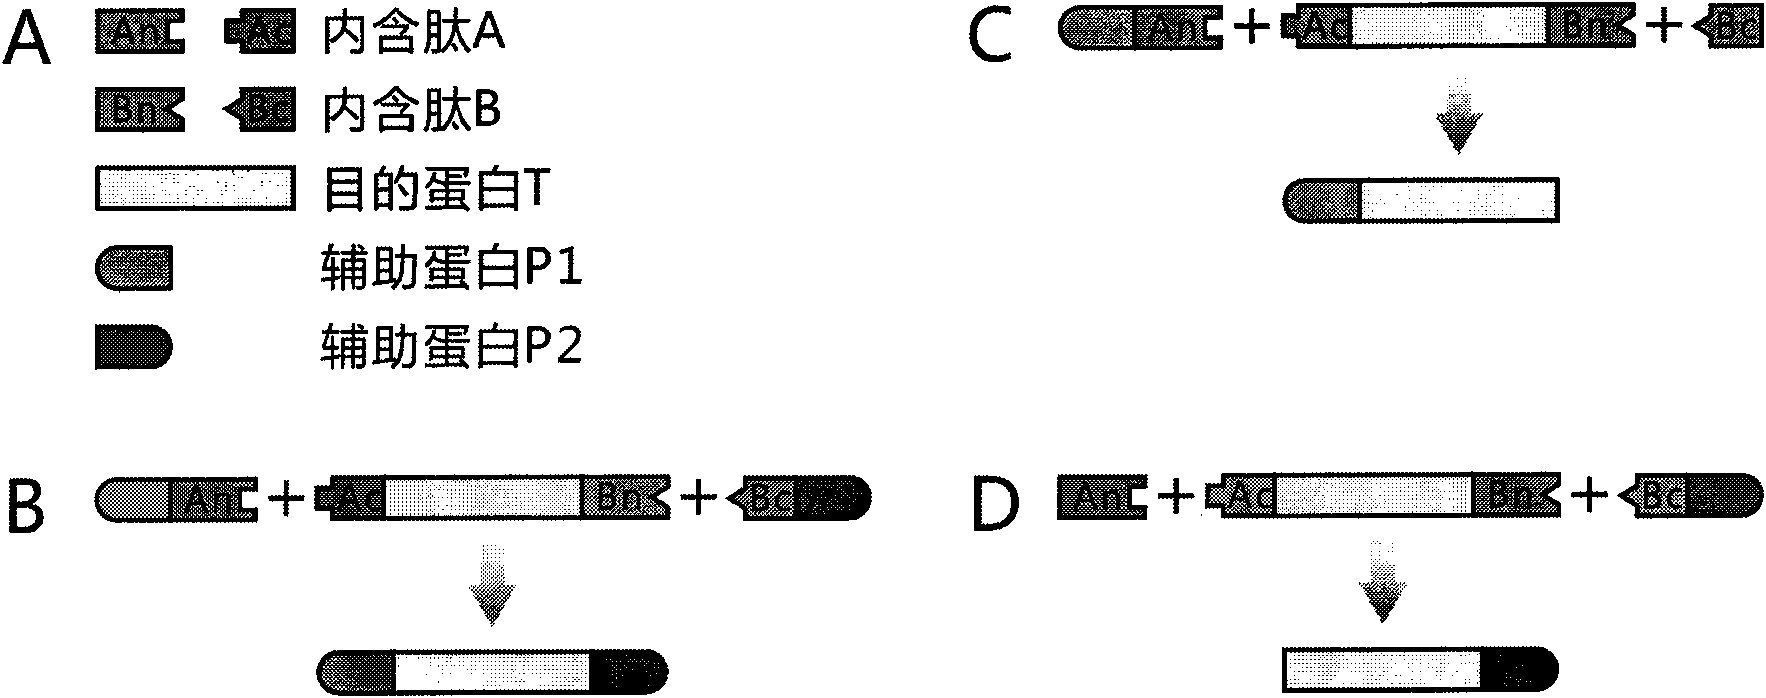 Method for modeling production of fusion protein by utilizing trans-splicing of intein